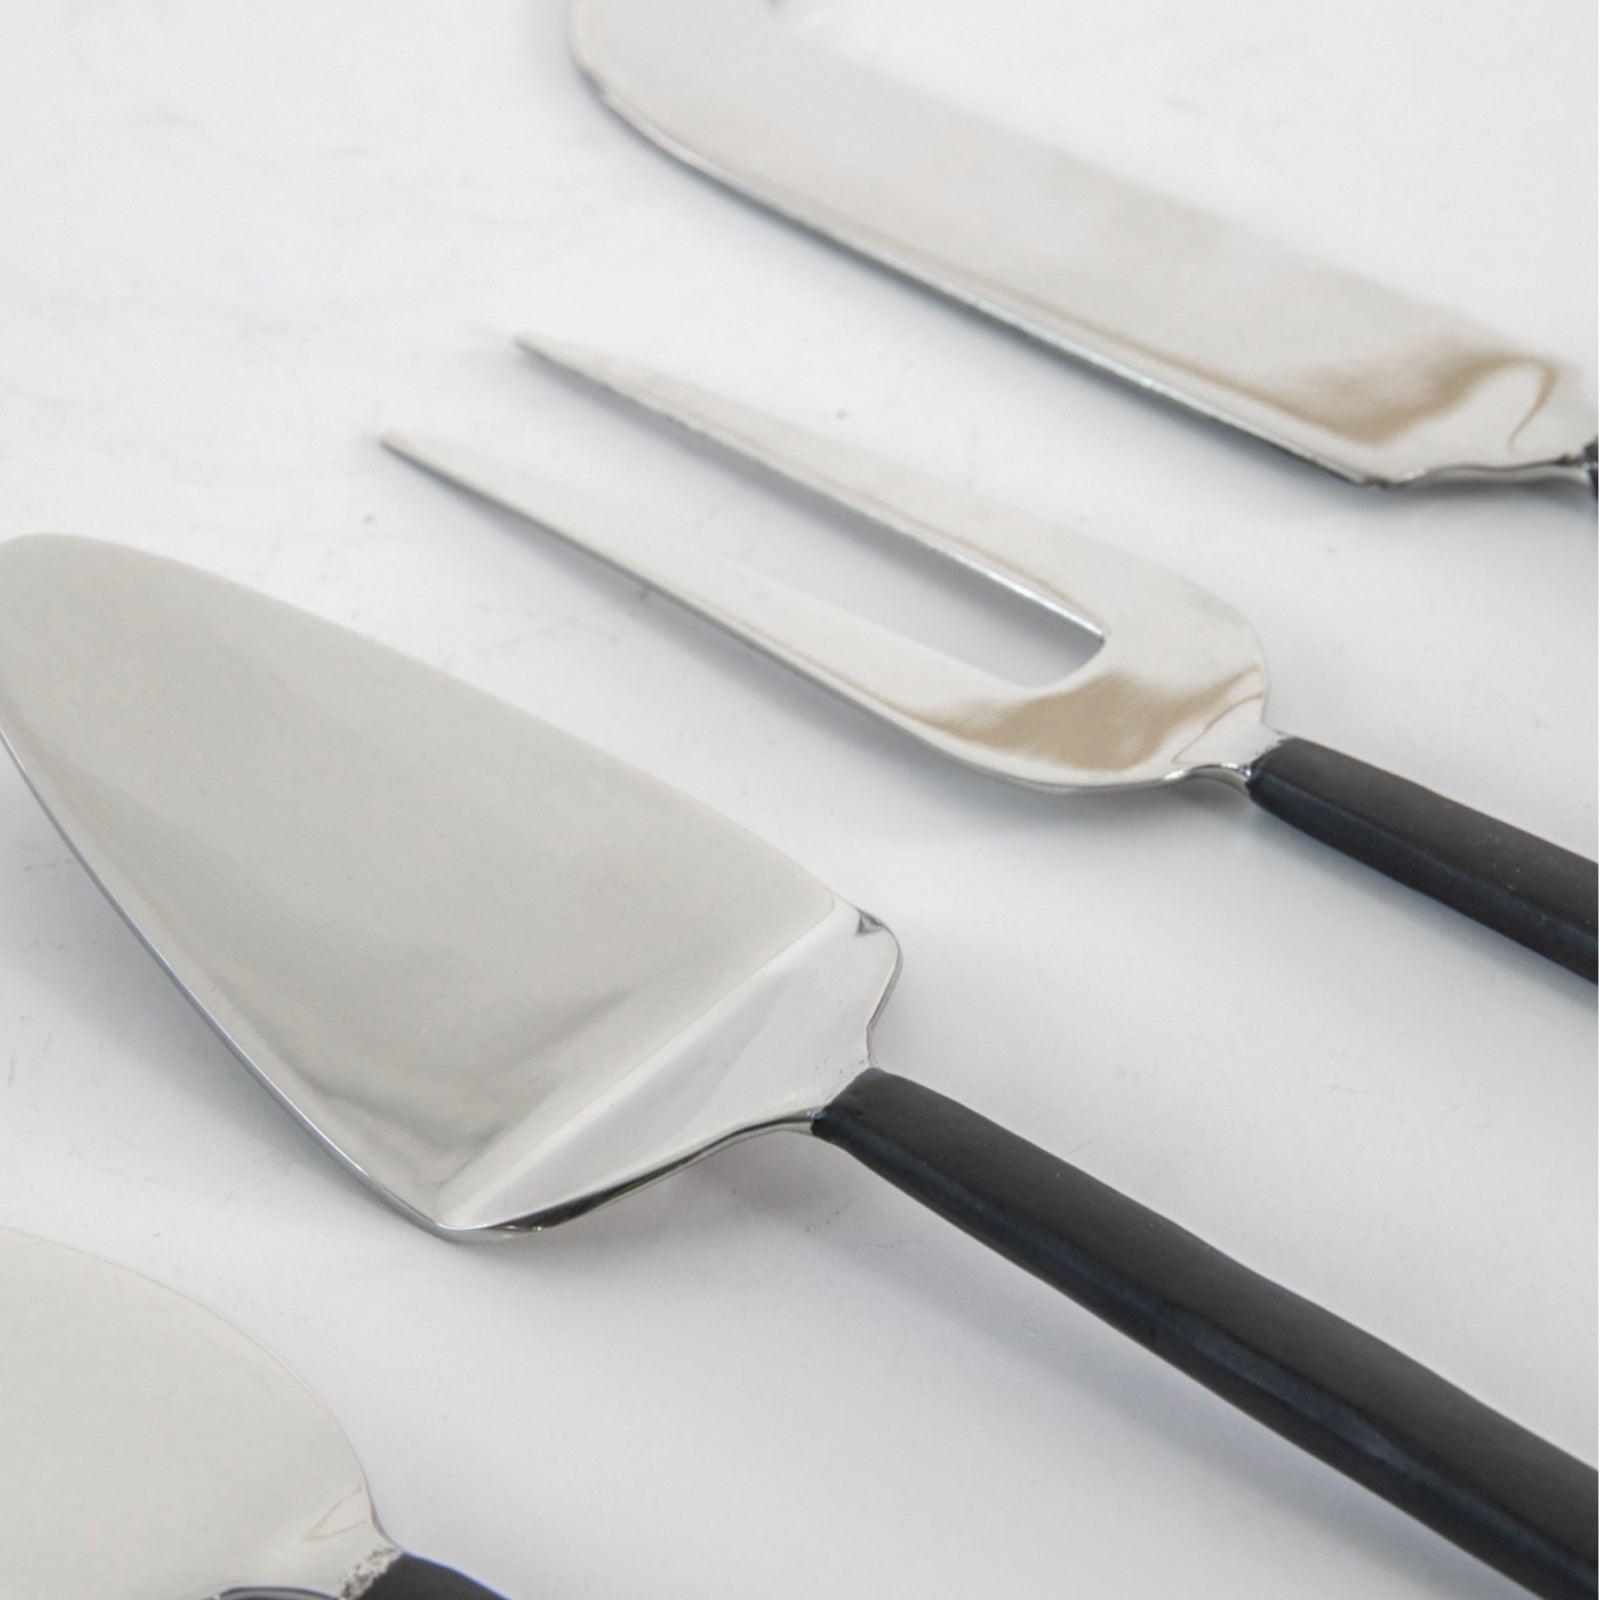 Stainless Steel with Black Handles Cheese Knife Set - The Farthing